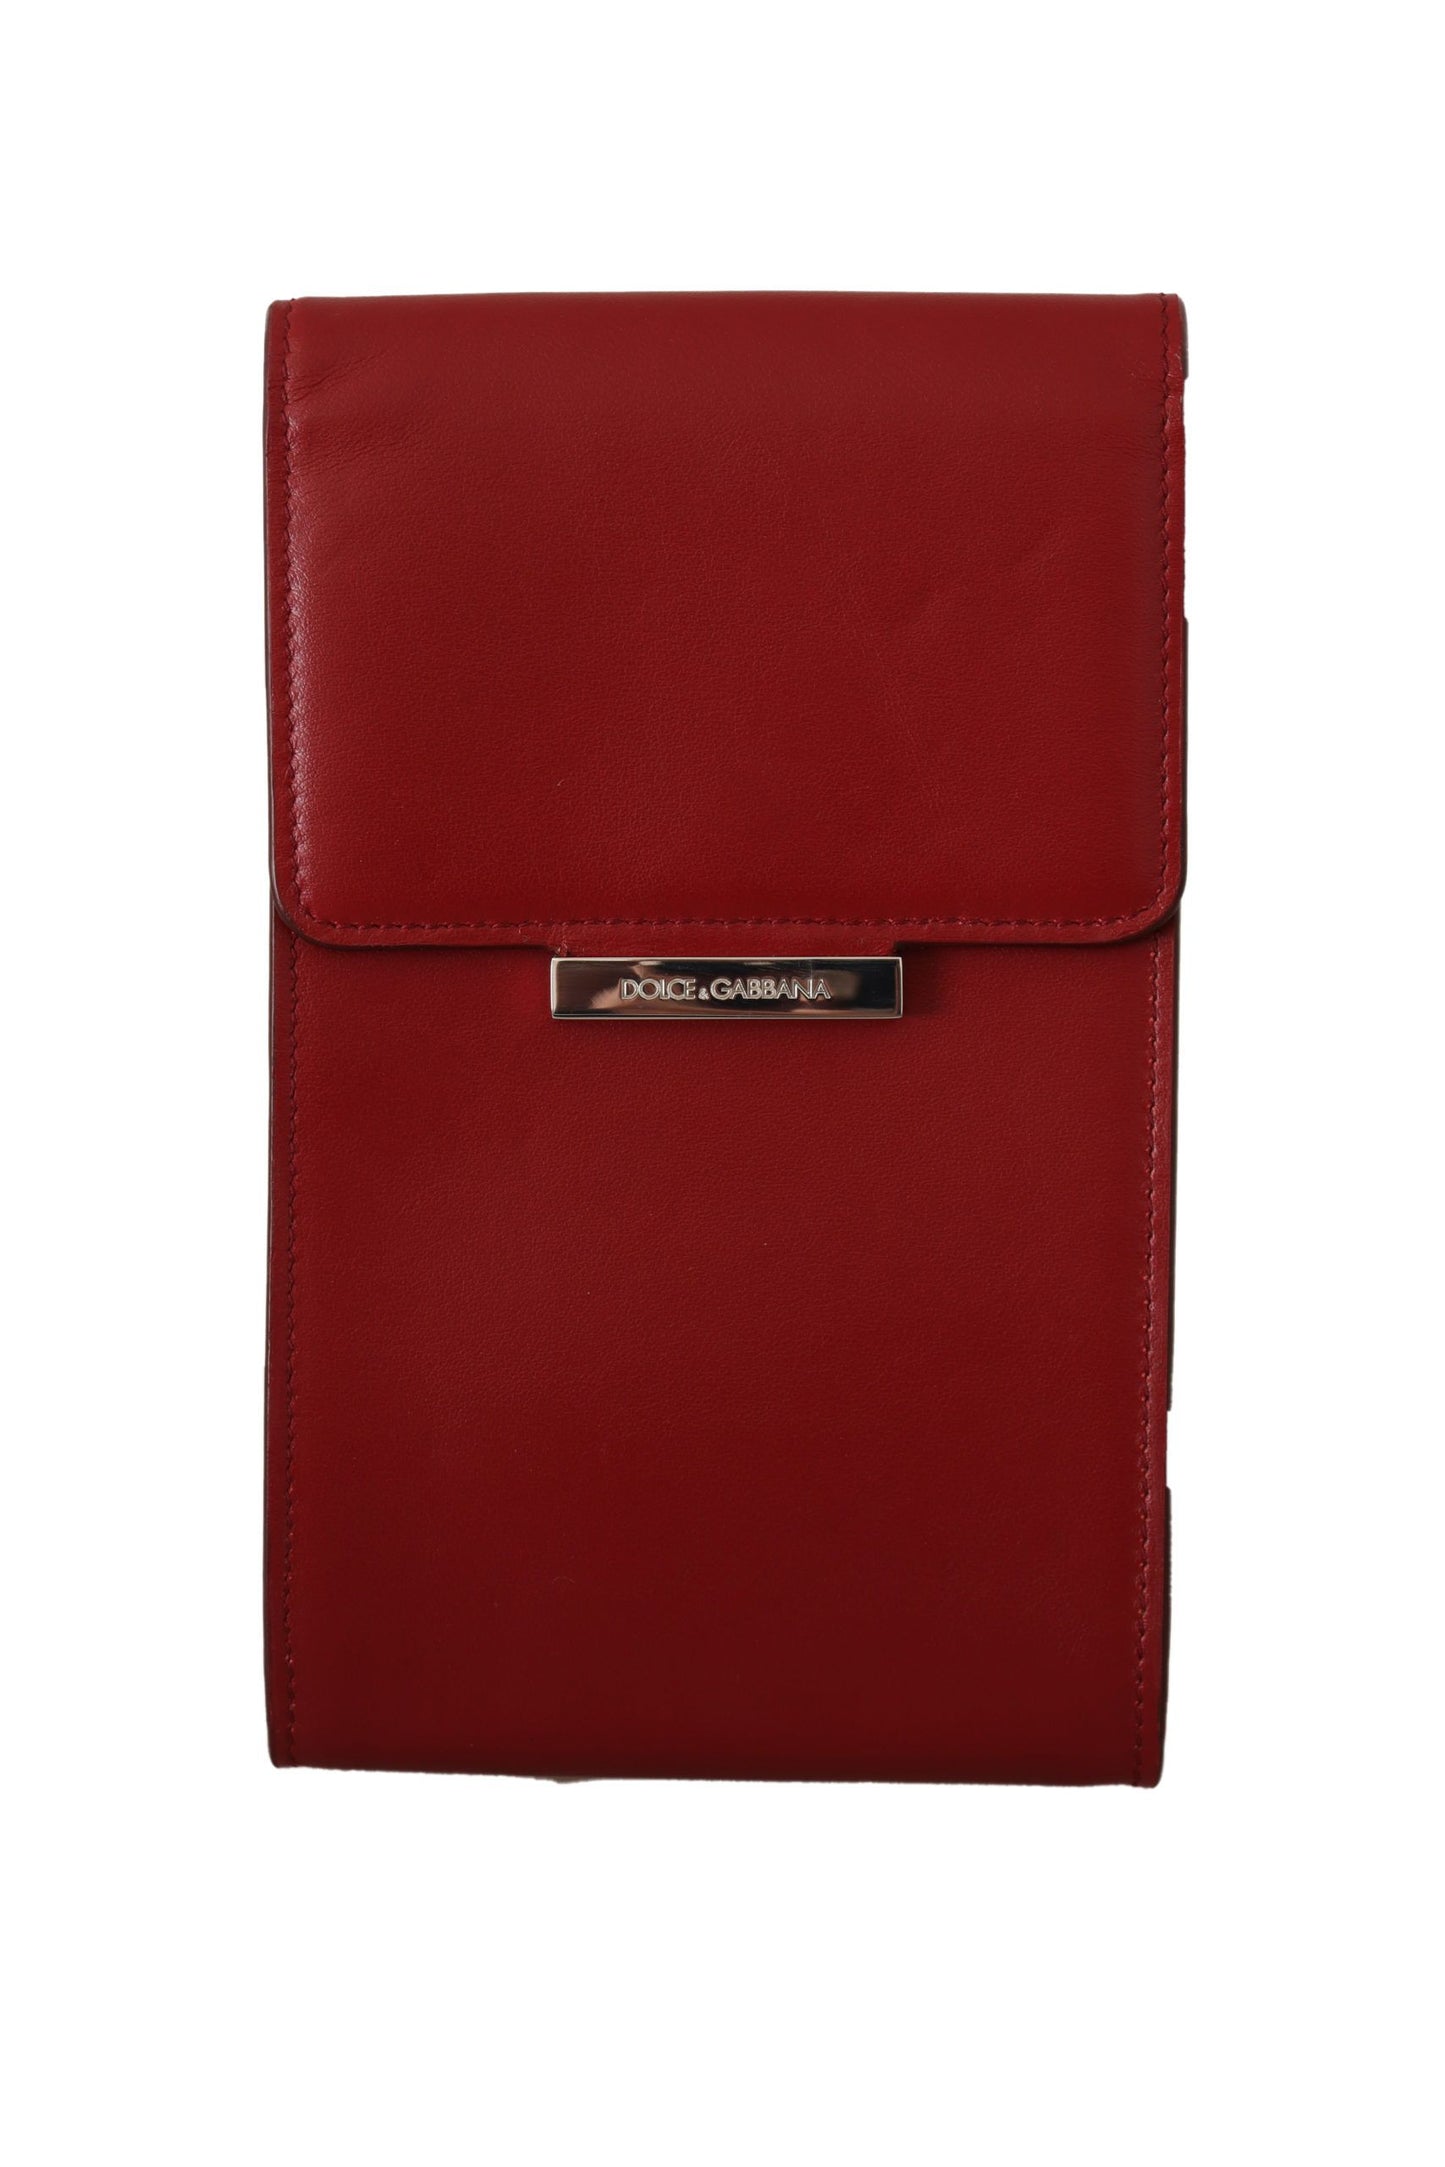 Dolce & Gabbana Red Leather Universal Phone Pocket Case